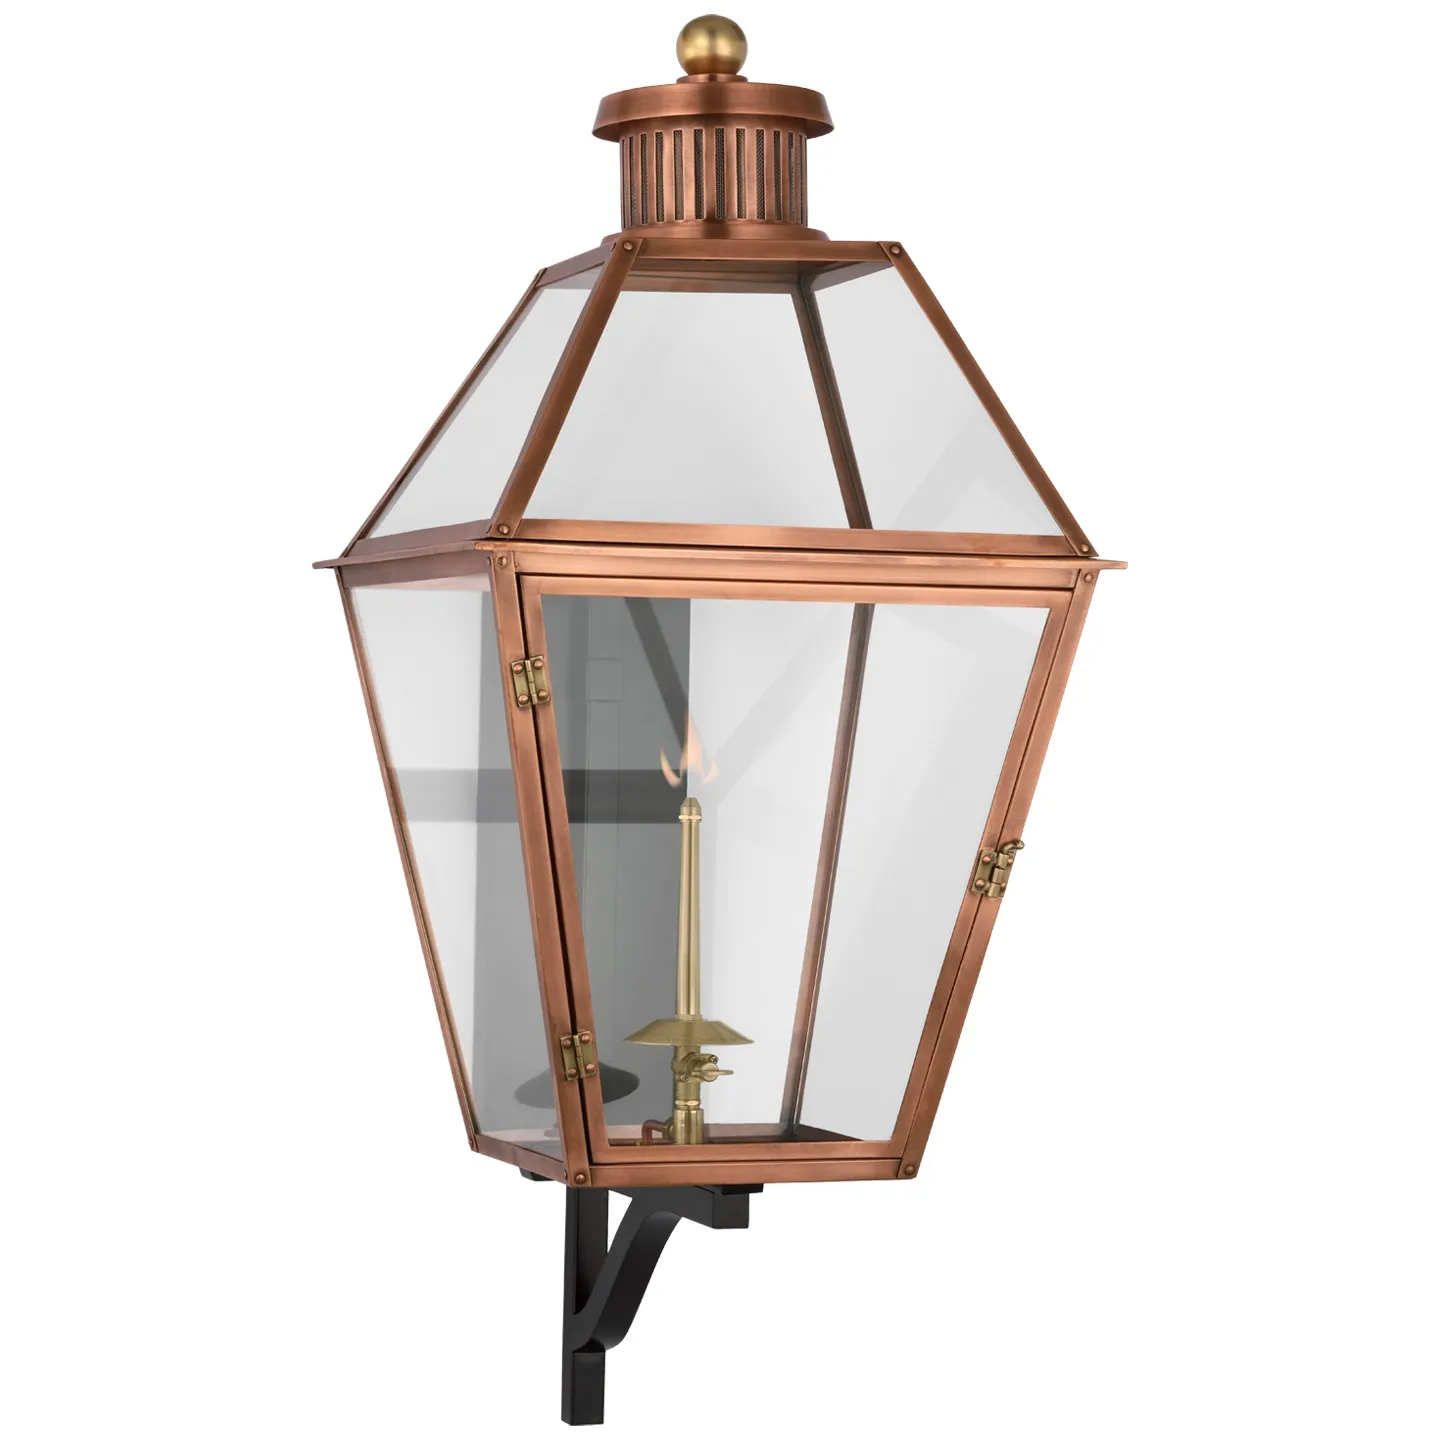 Stratford Large Bracketed Gas Wall Lantern in Soft Copper with Clear Glass